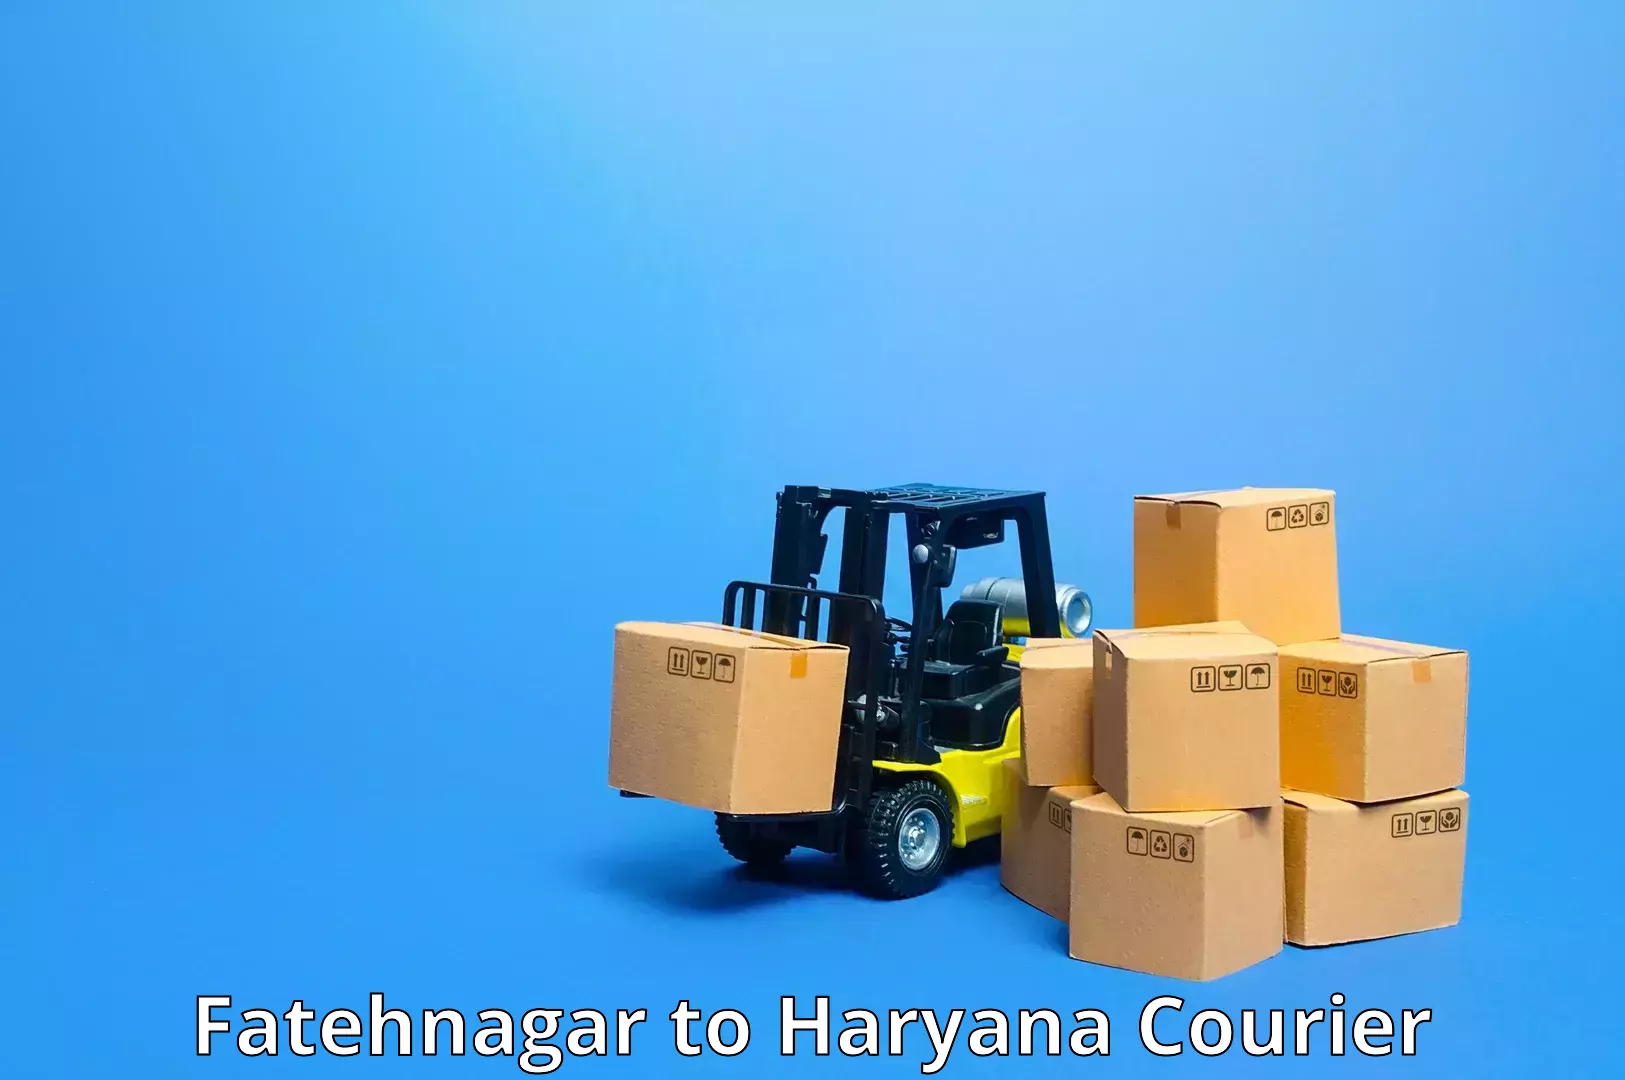 Express delivery capabilities Fatehnagar to Pinjore